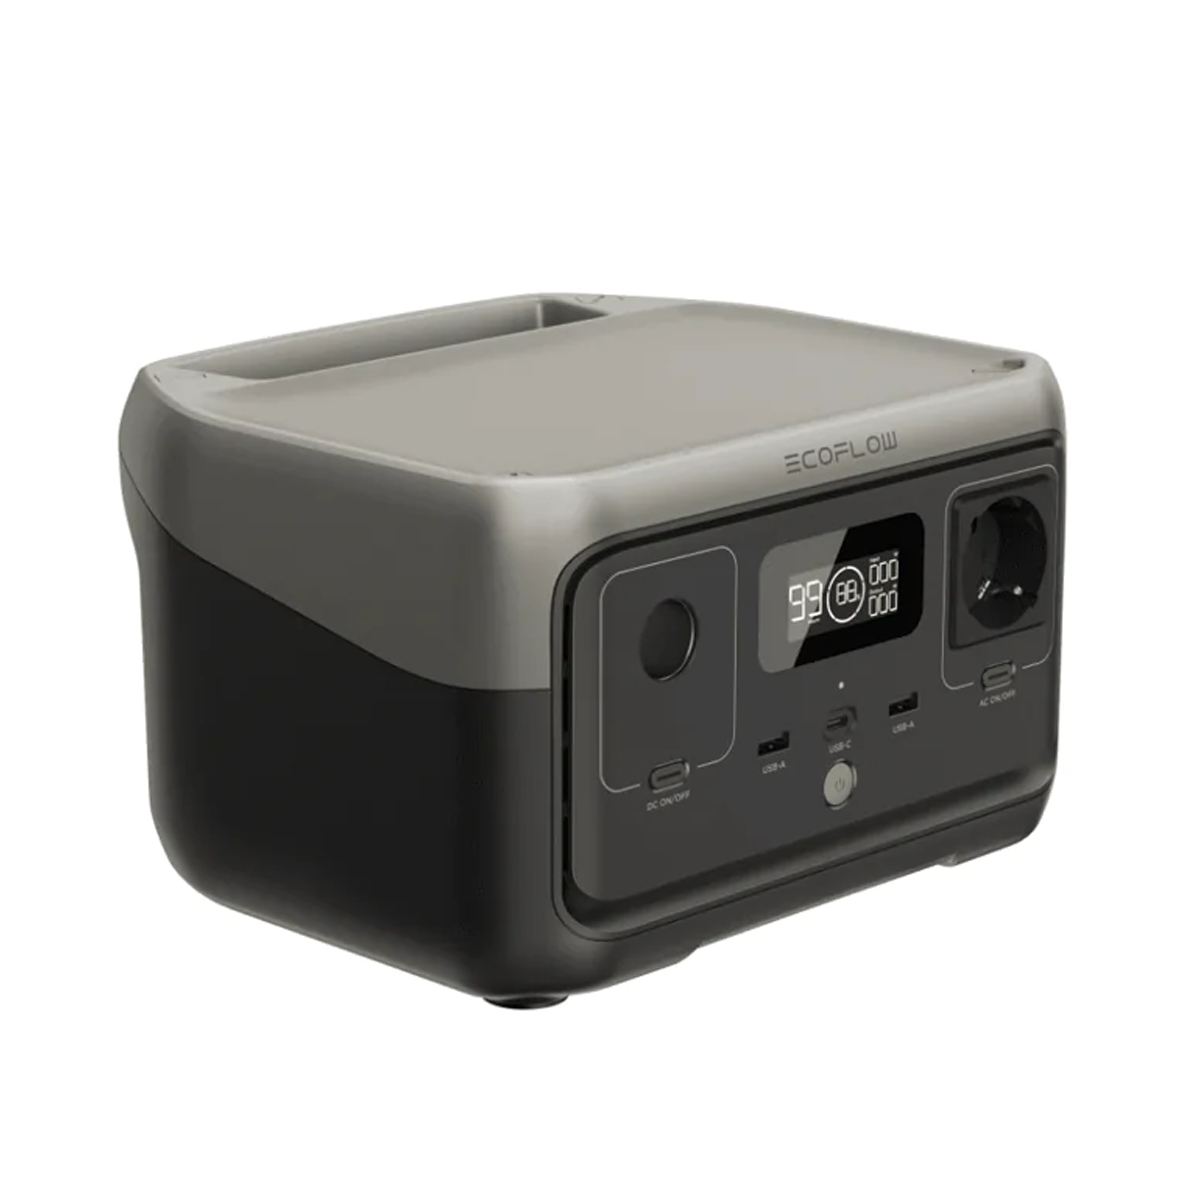 [OUTLET#242] ECOFLOW RIVER 2 [ 256Wh / 300W ] PORTABLE POWER STATION